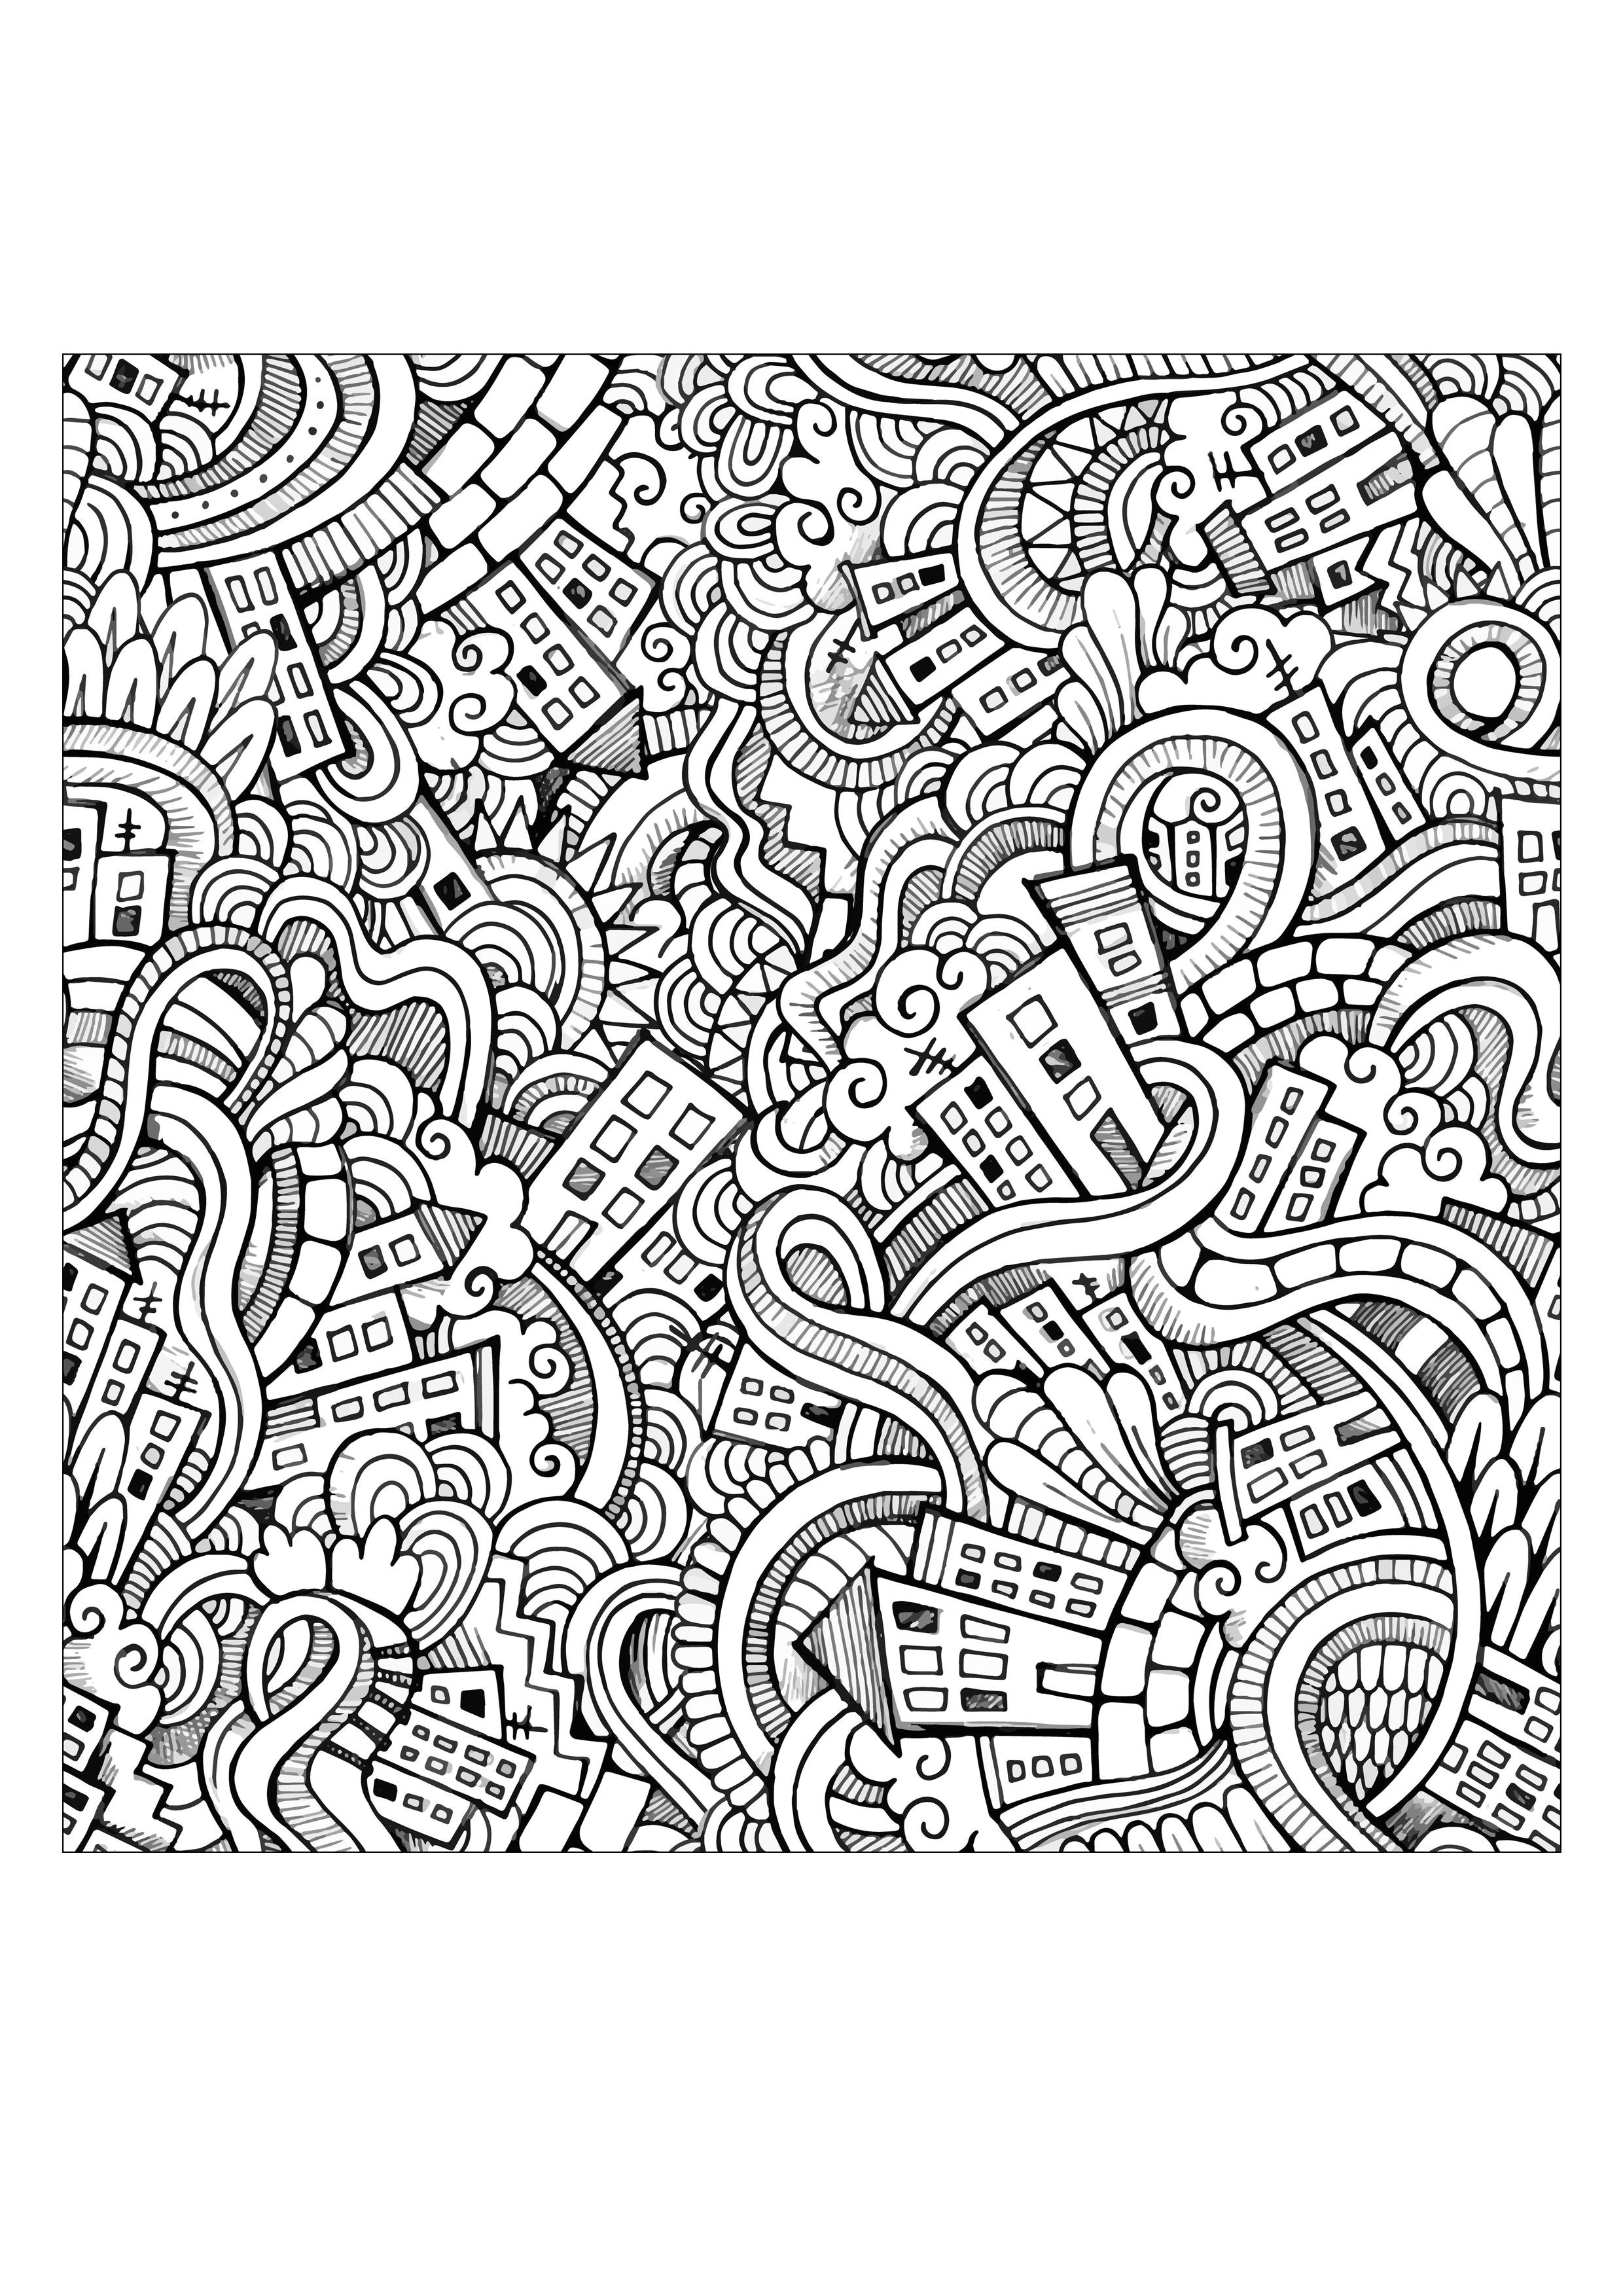 Free coloring page coloring adult incredible city doodle by Olga Kostenko Incredible city a coloring page based on a Doodle drawing by Olga Kotsenko